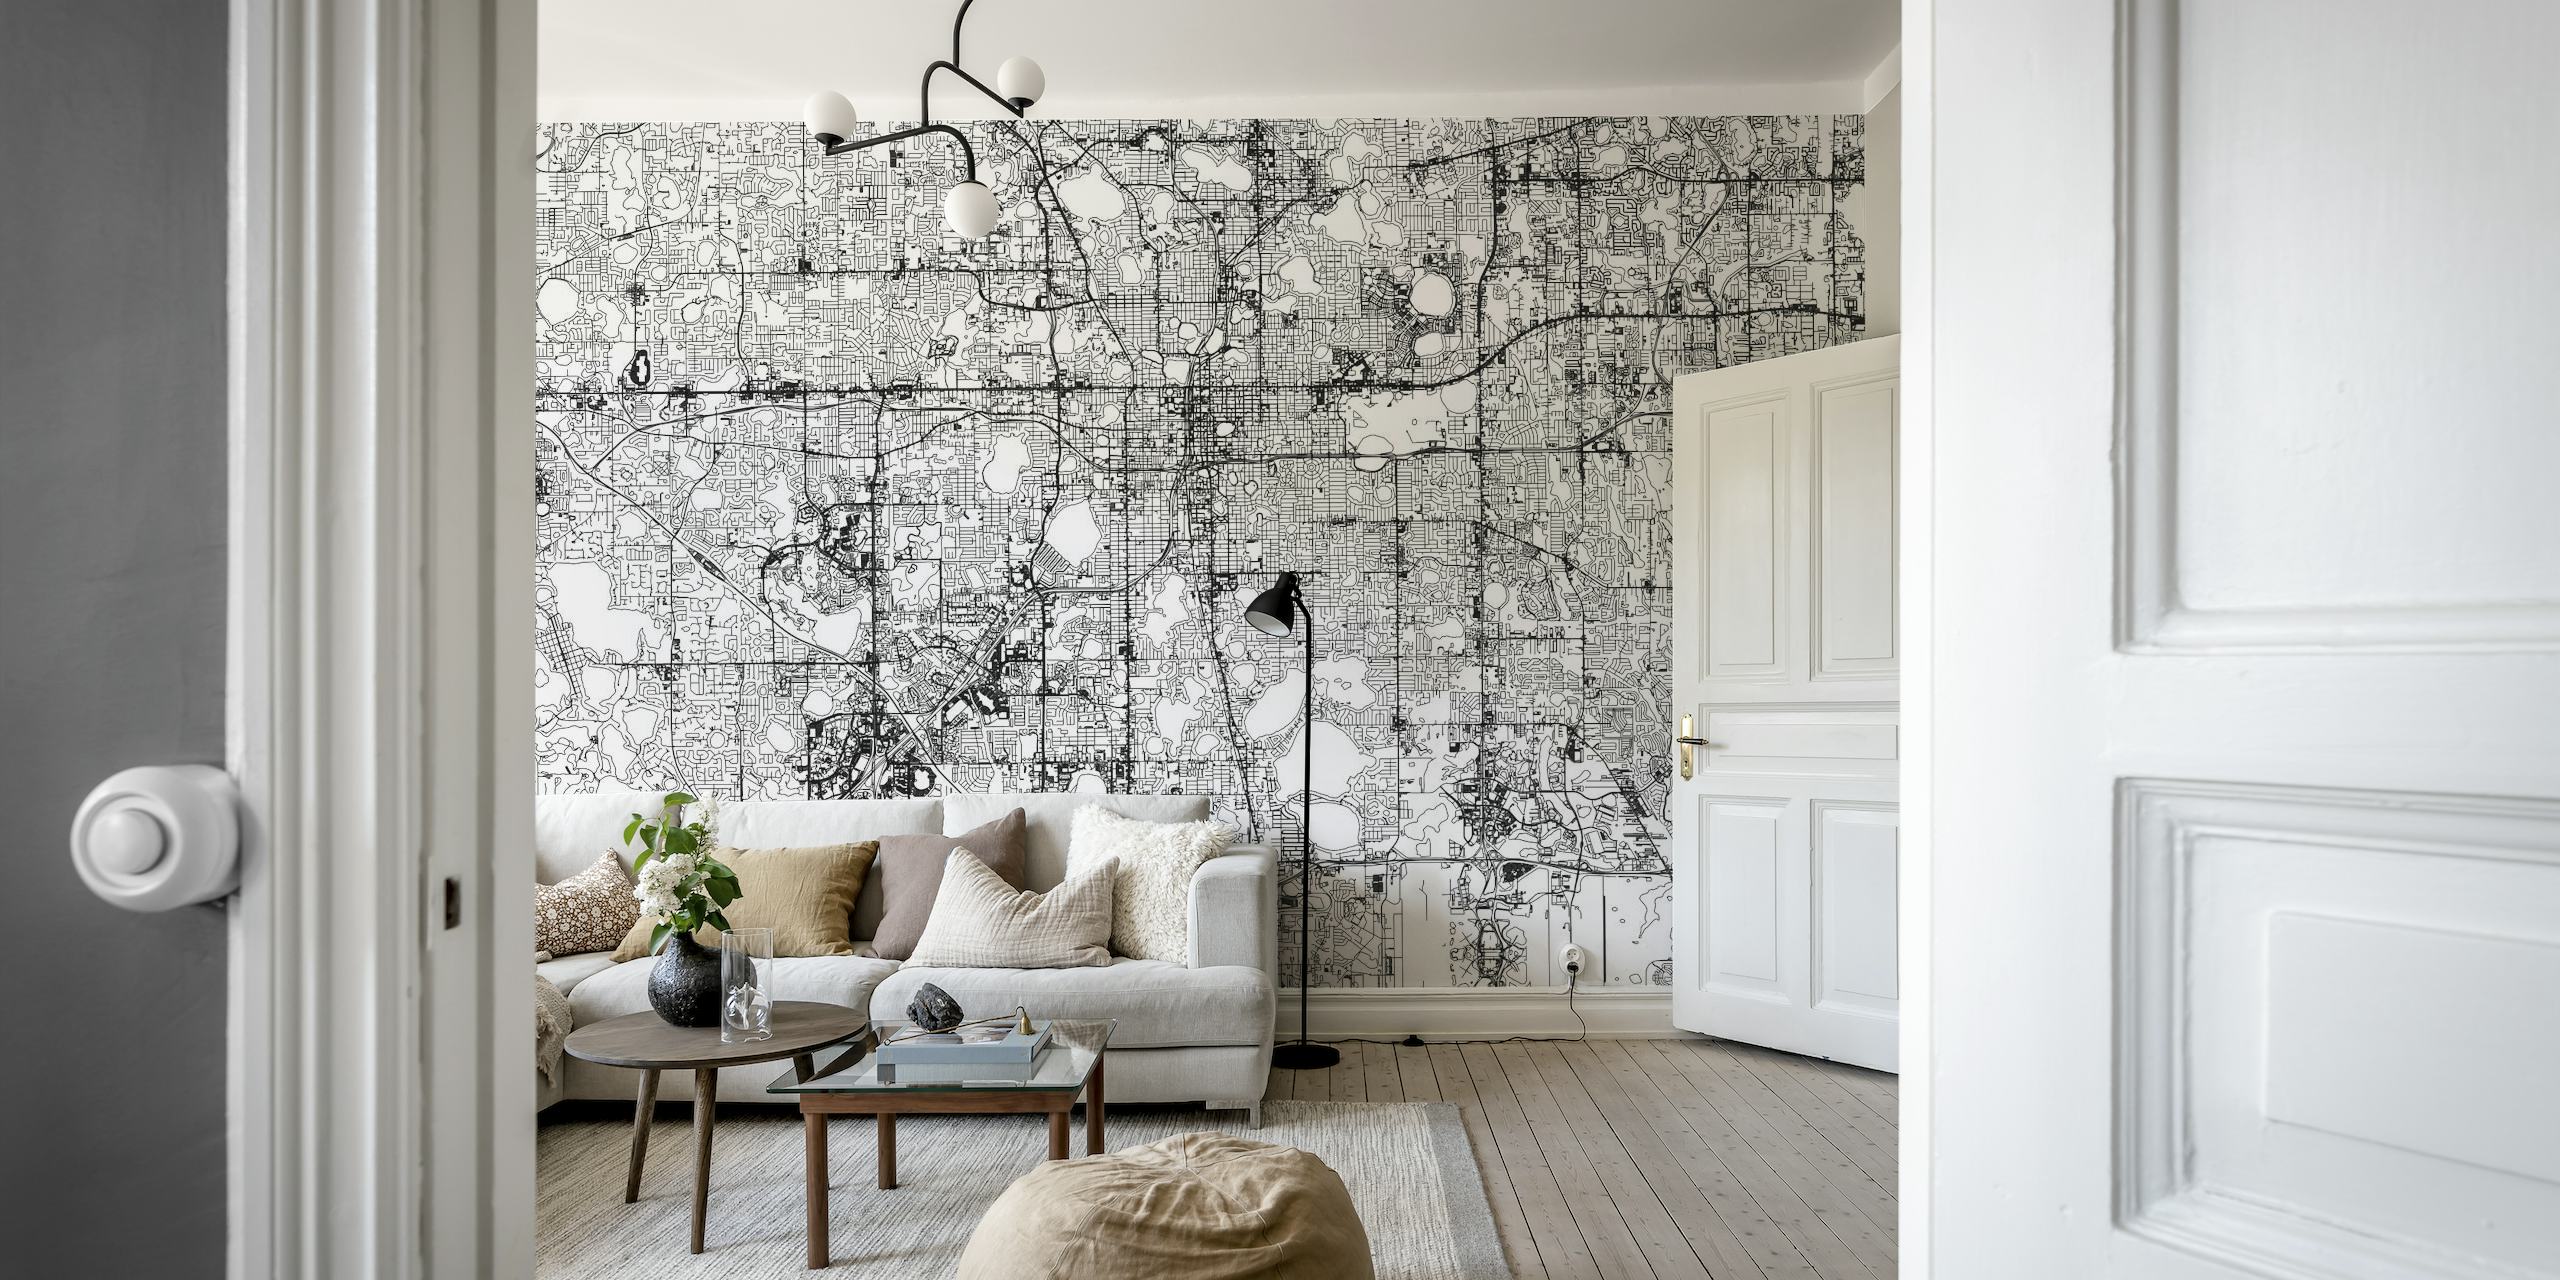 Orlando Map wall mural showing intricate street layouts and geographical features